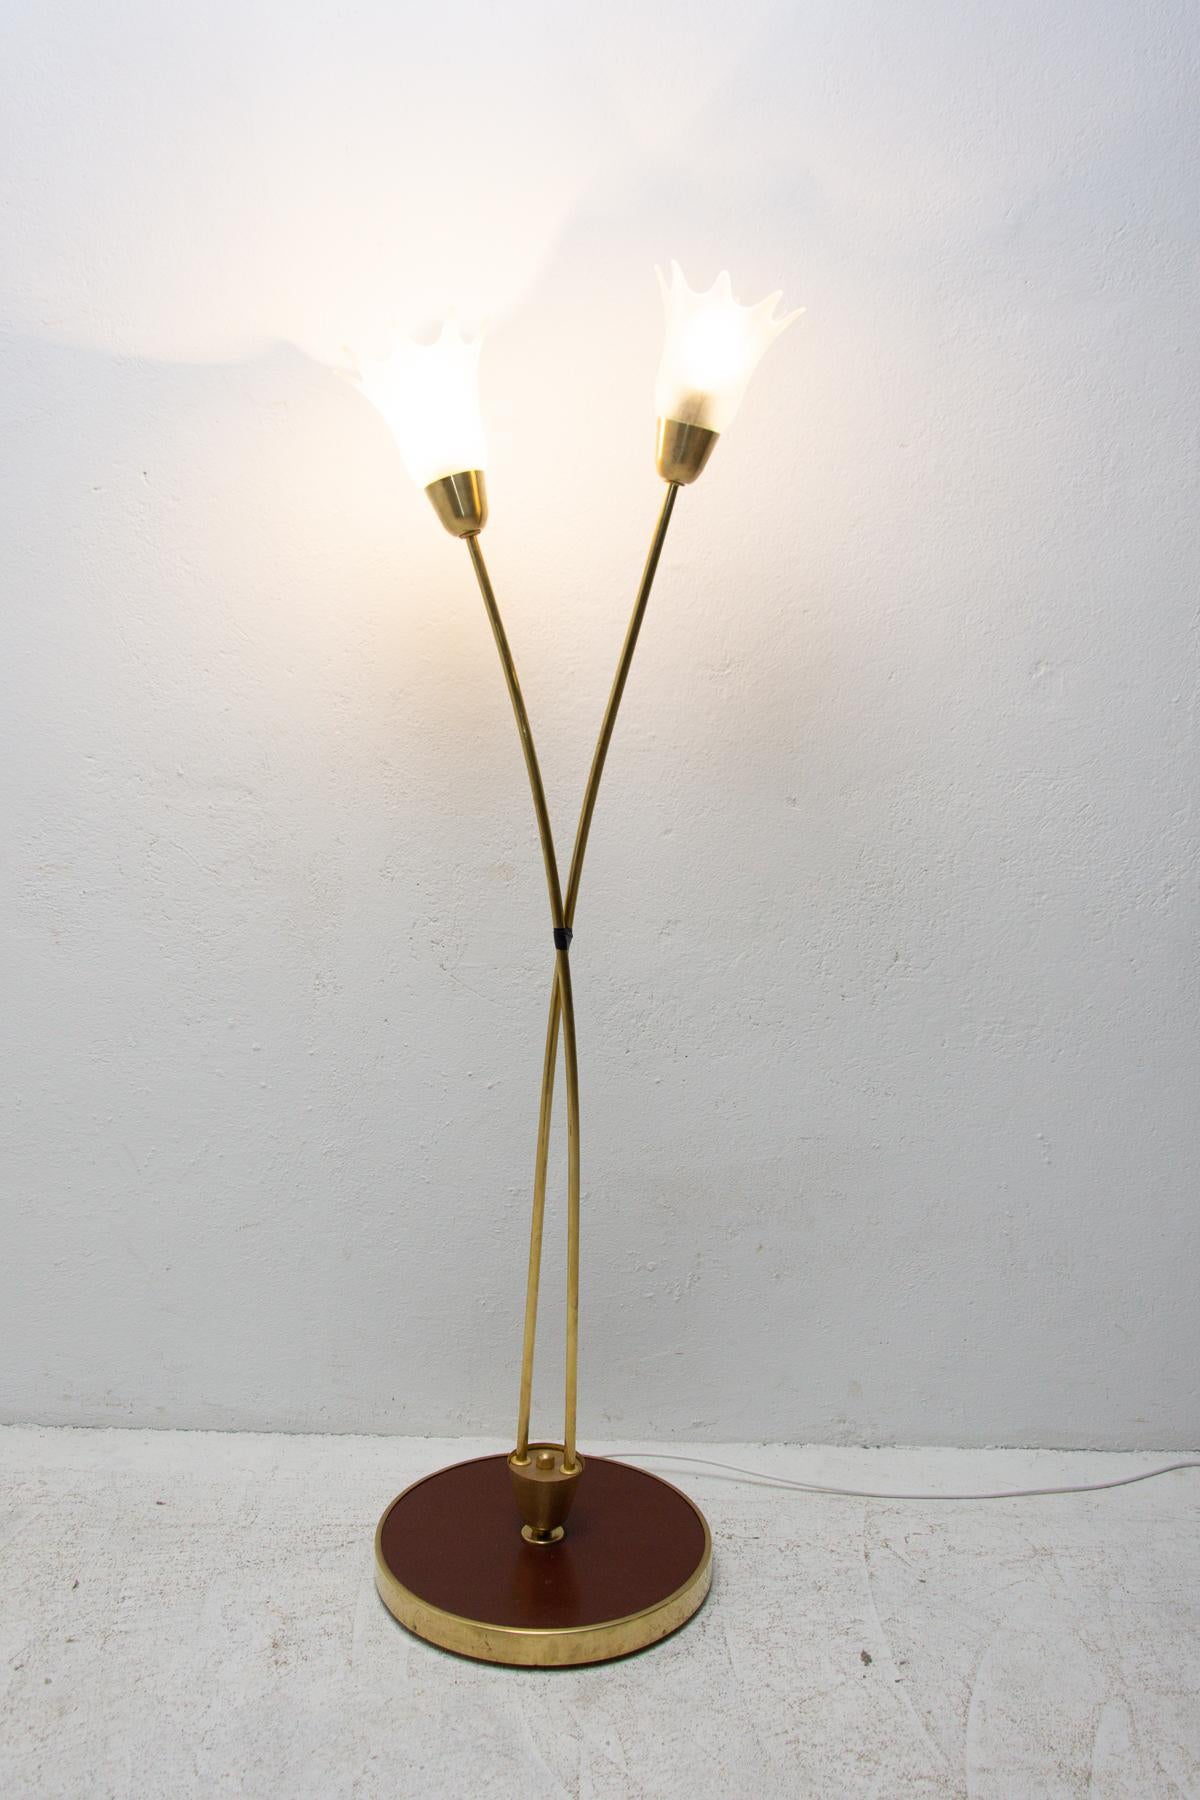 This standing lamp is a typical example of Czechoslovak lightings from the mid century associated with “Brussels period” and world-renowned EXPO58. Nickel-plated construction, two frosted glass lampshades. New wiring. In good Vintage